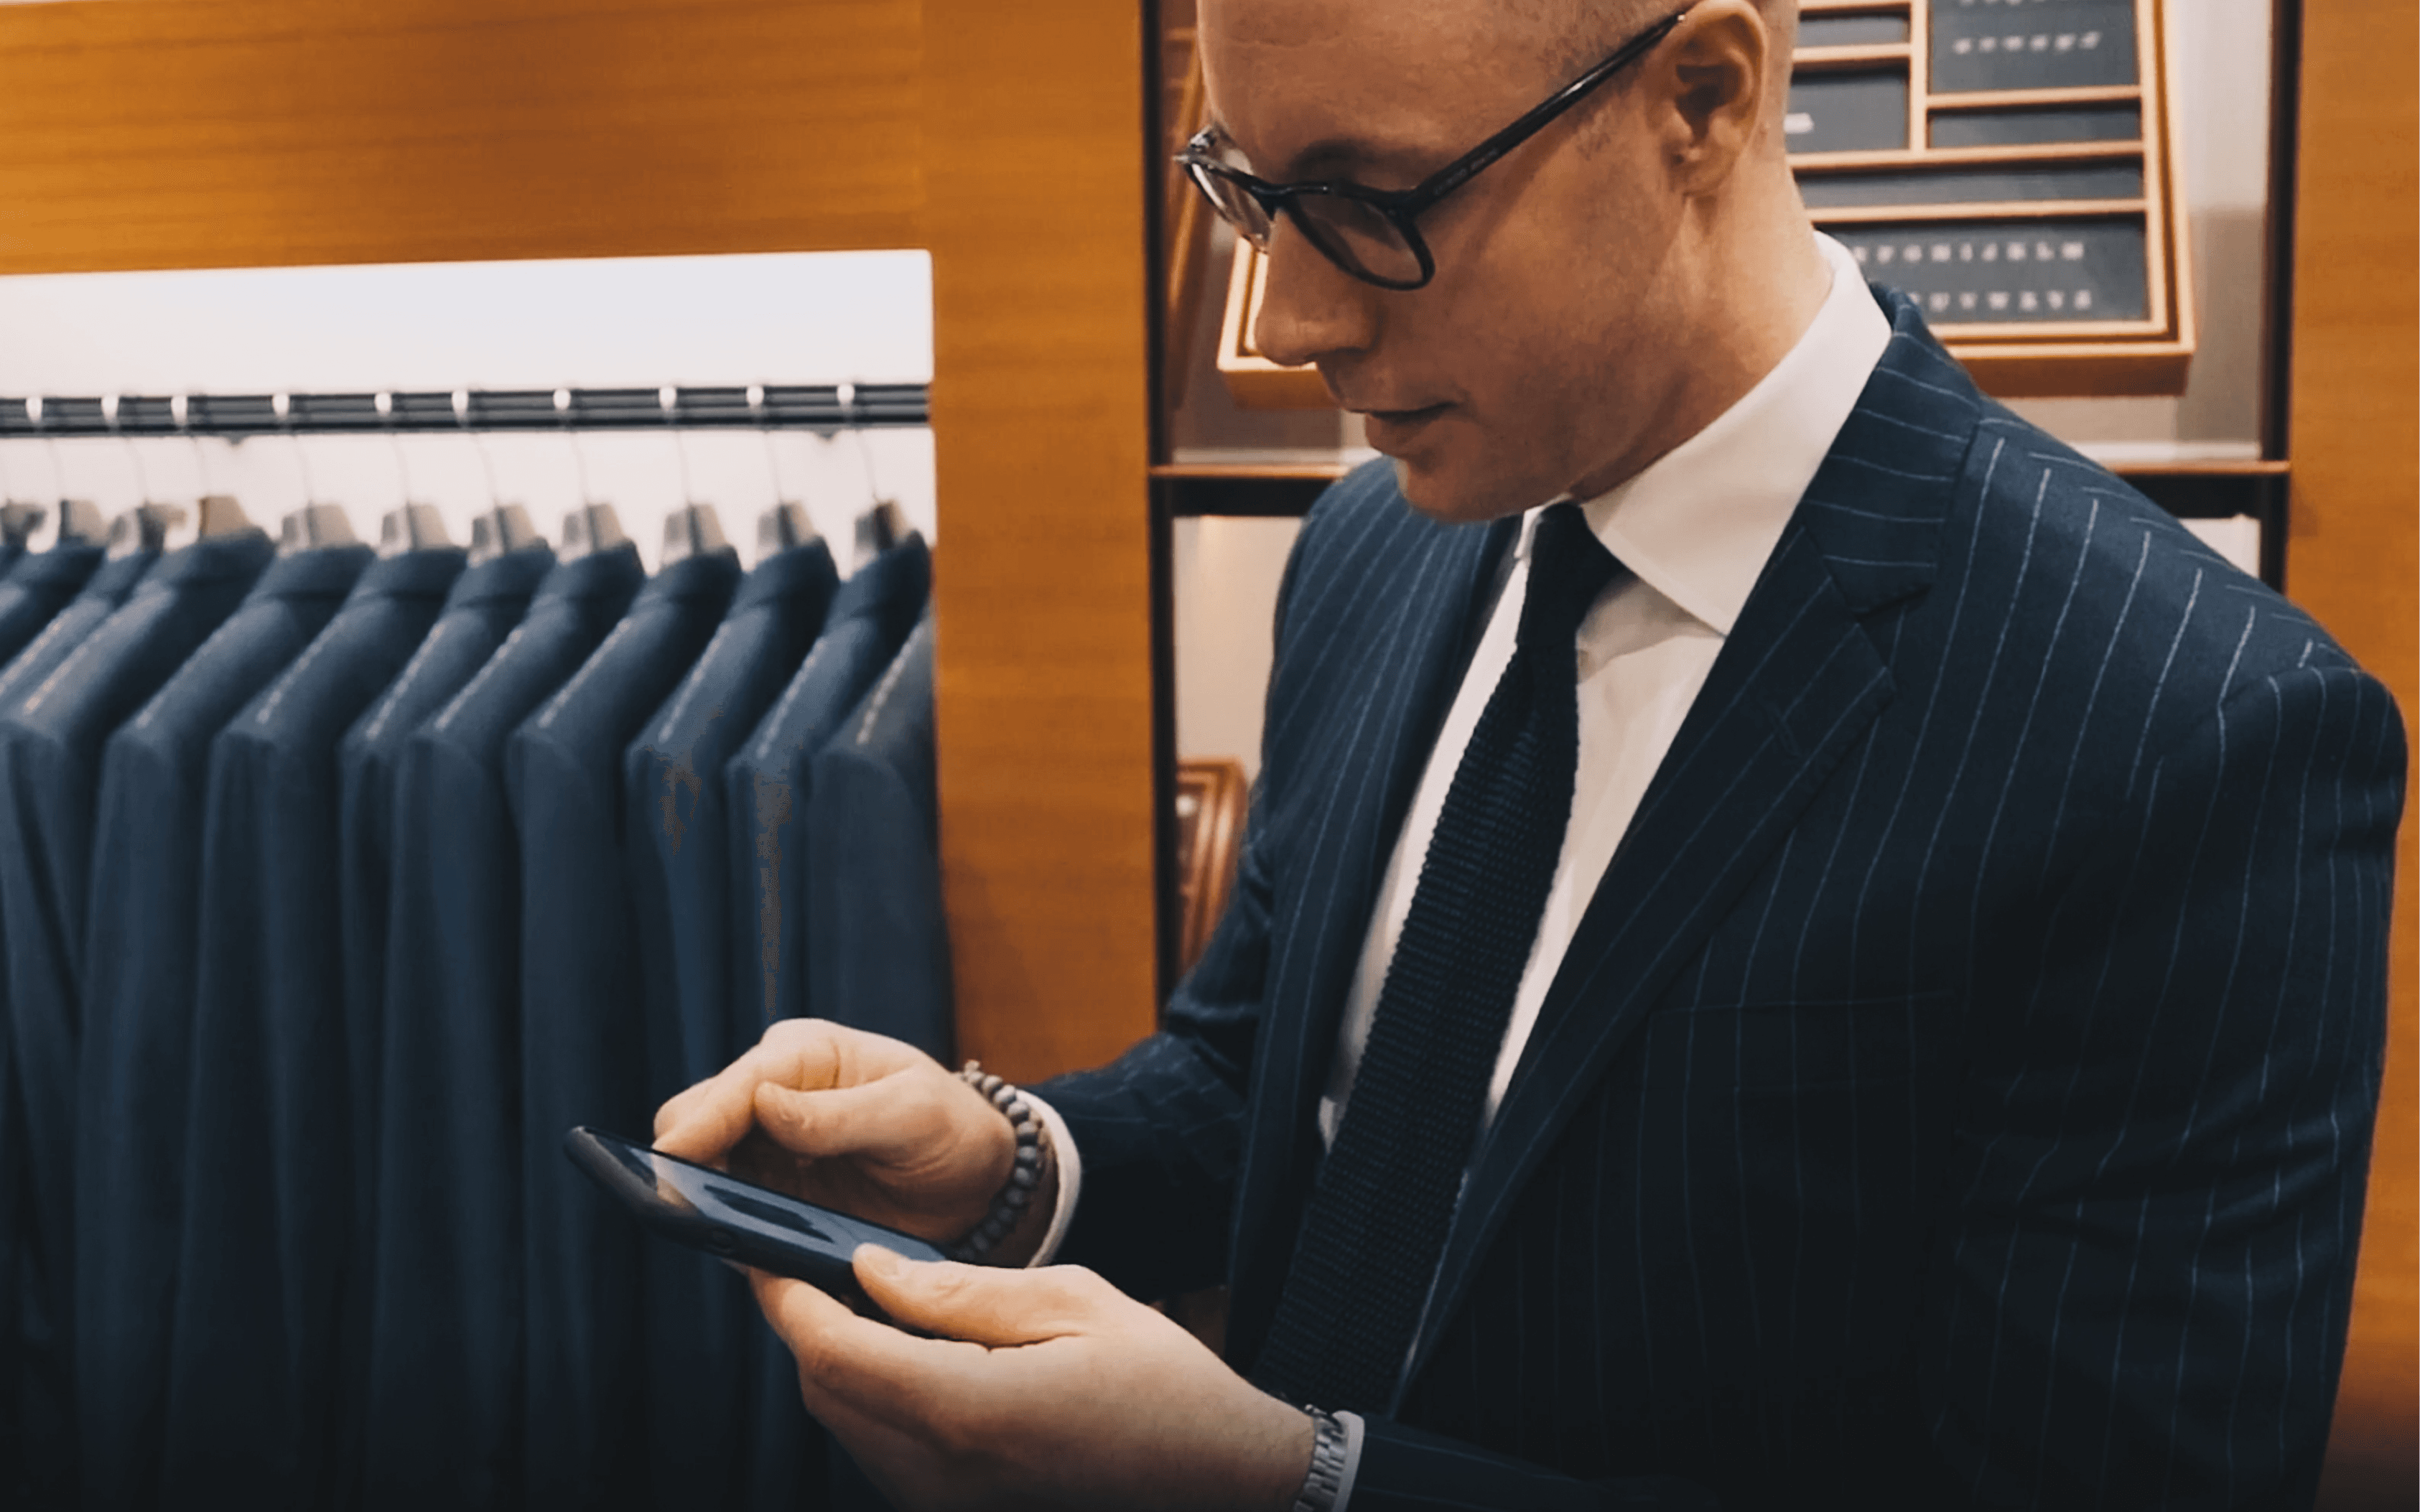 Harry Rosen retail sales representative using the mobile app to enhance the shopping experience.